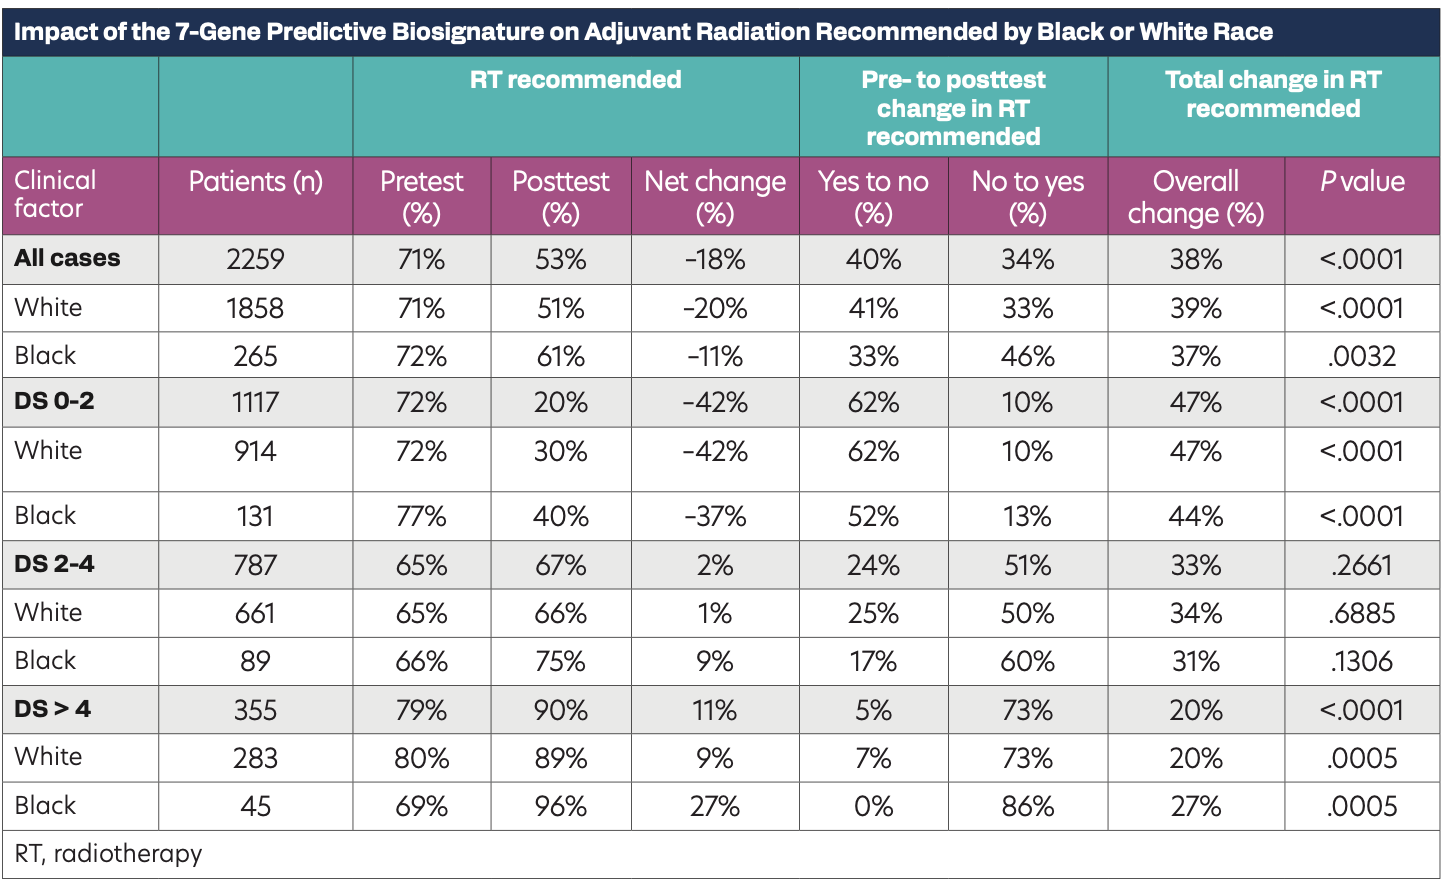 Impact of the 7-Gene Predictive Biosignature on Adjuvant Radiation Recommended by Black or White Race